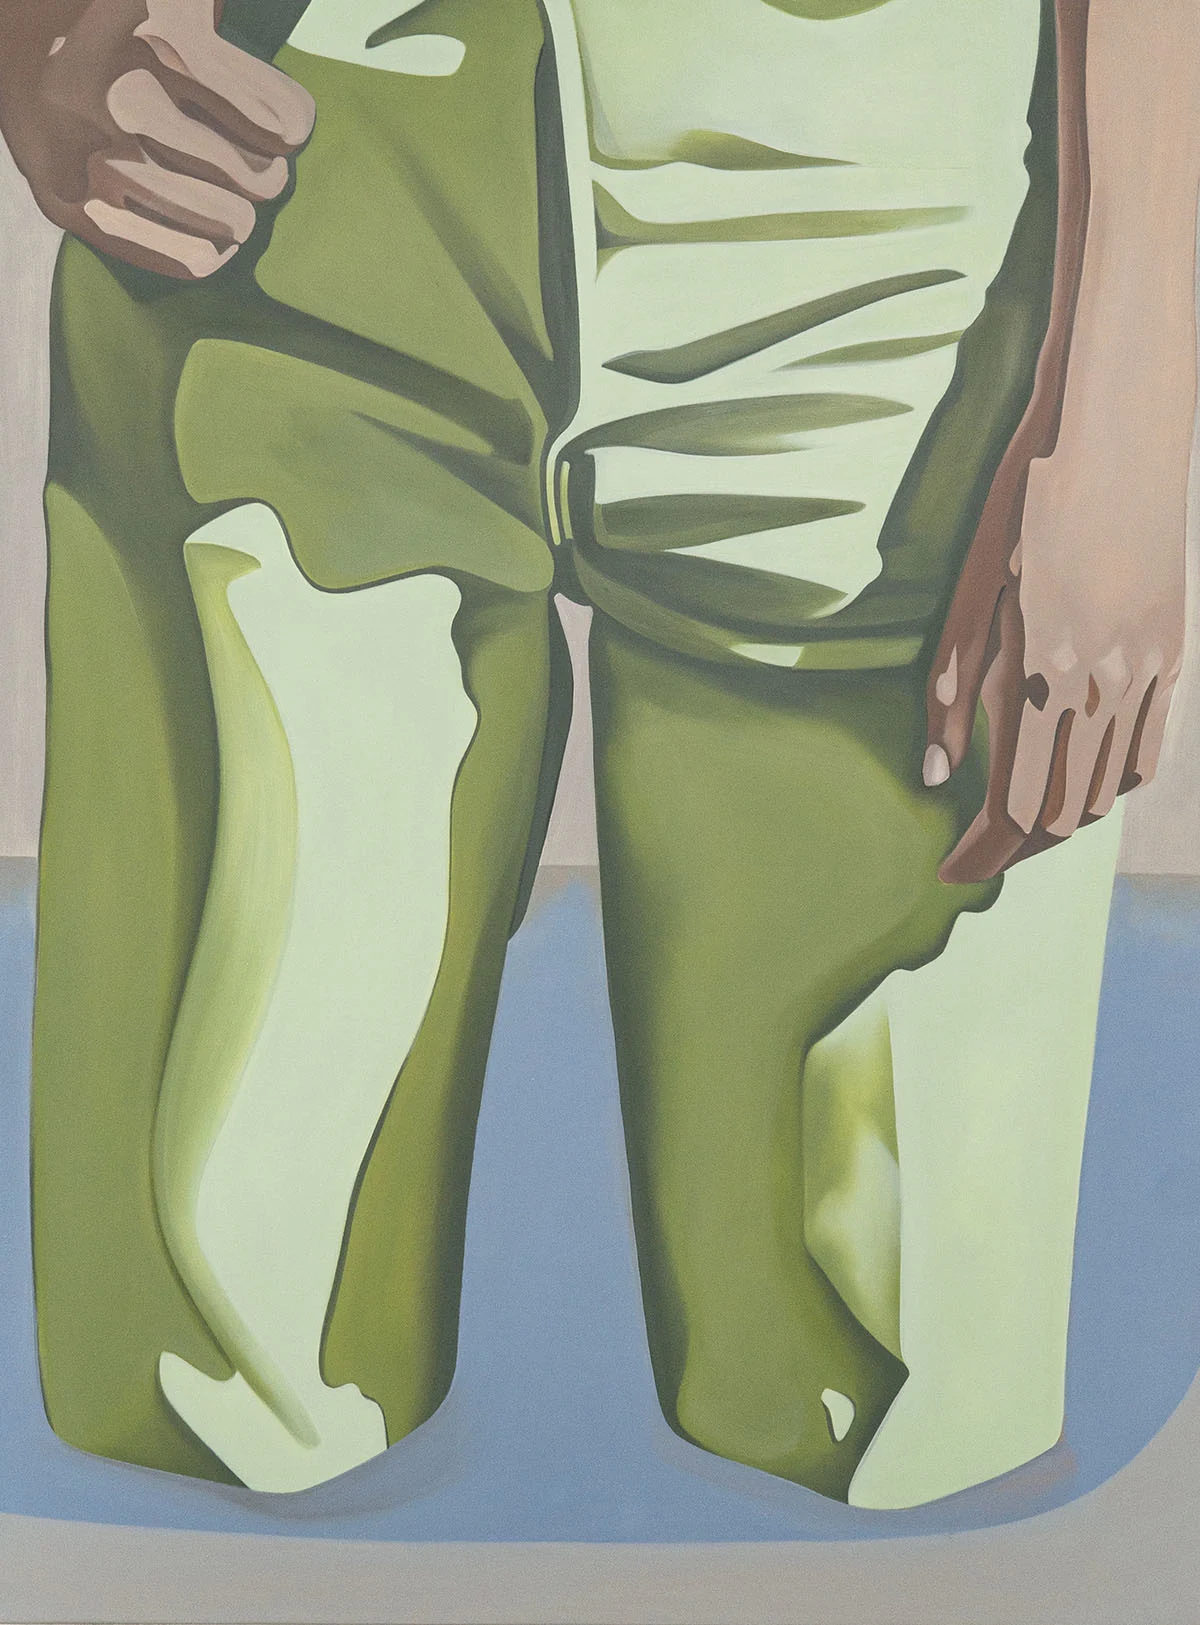 “Green Pants,” 2022 (Oil on canvas, 40 x 30 inches) — $4,700